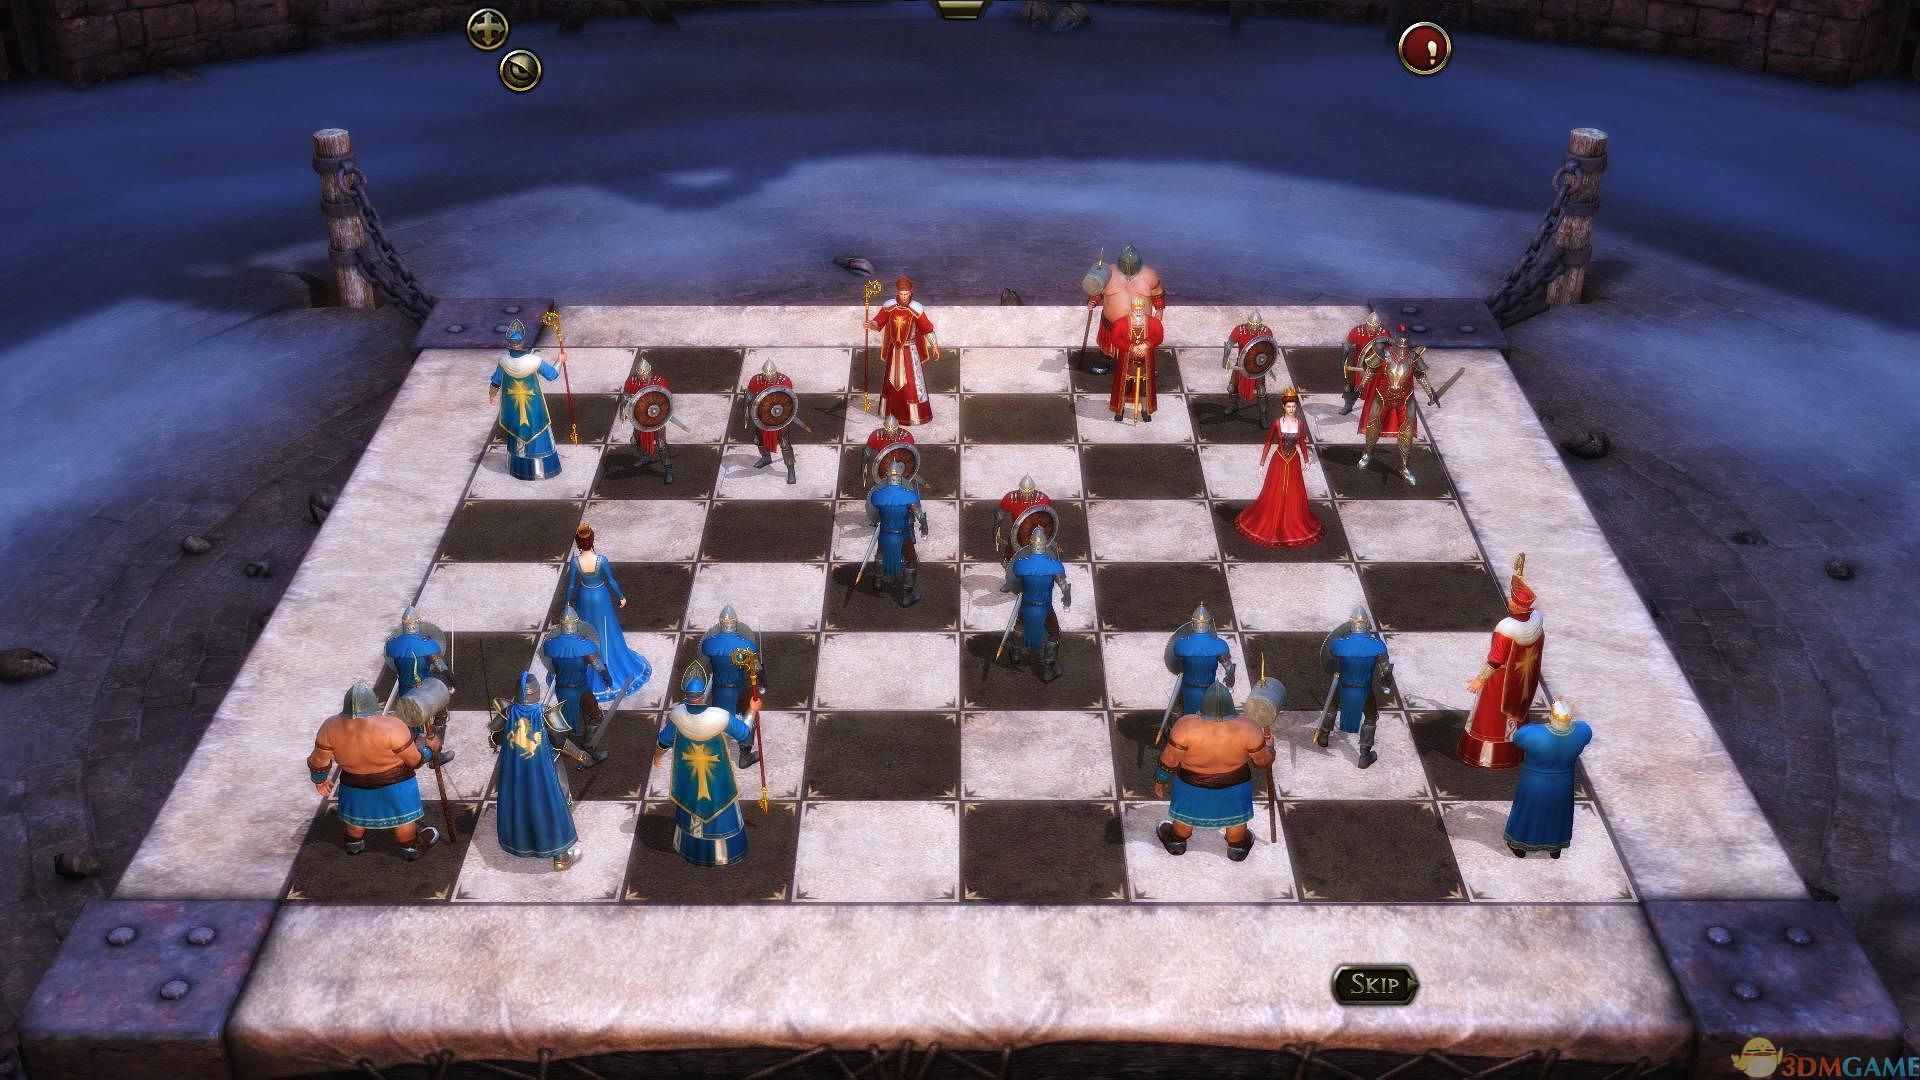 battle chess game